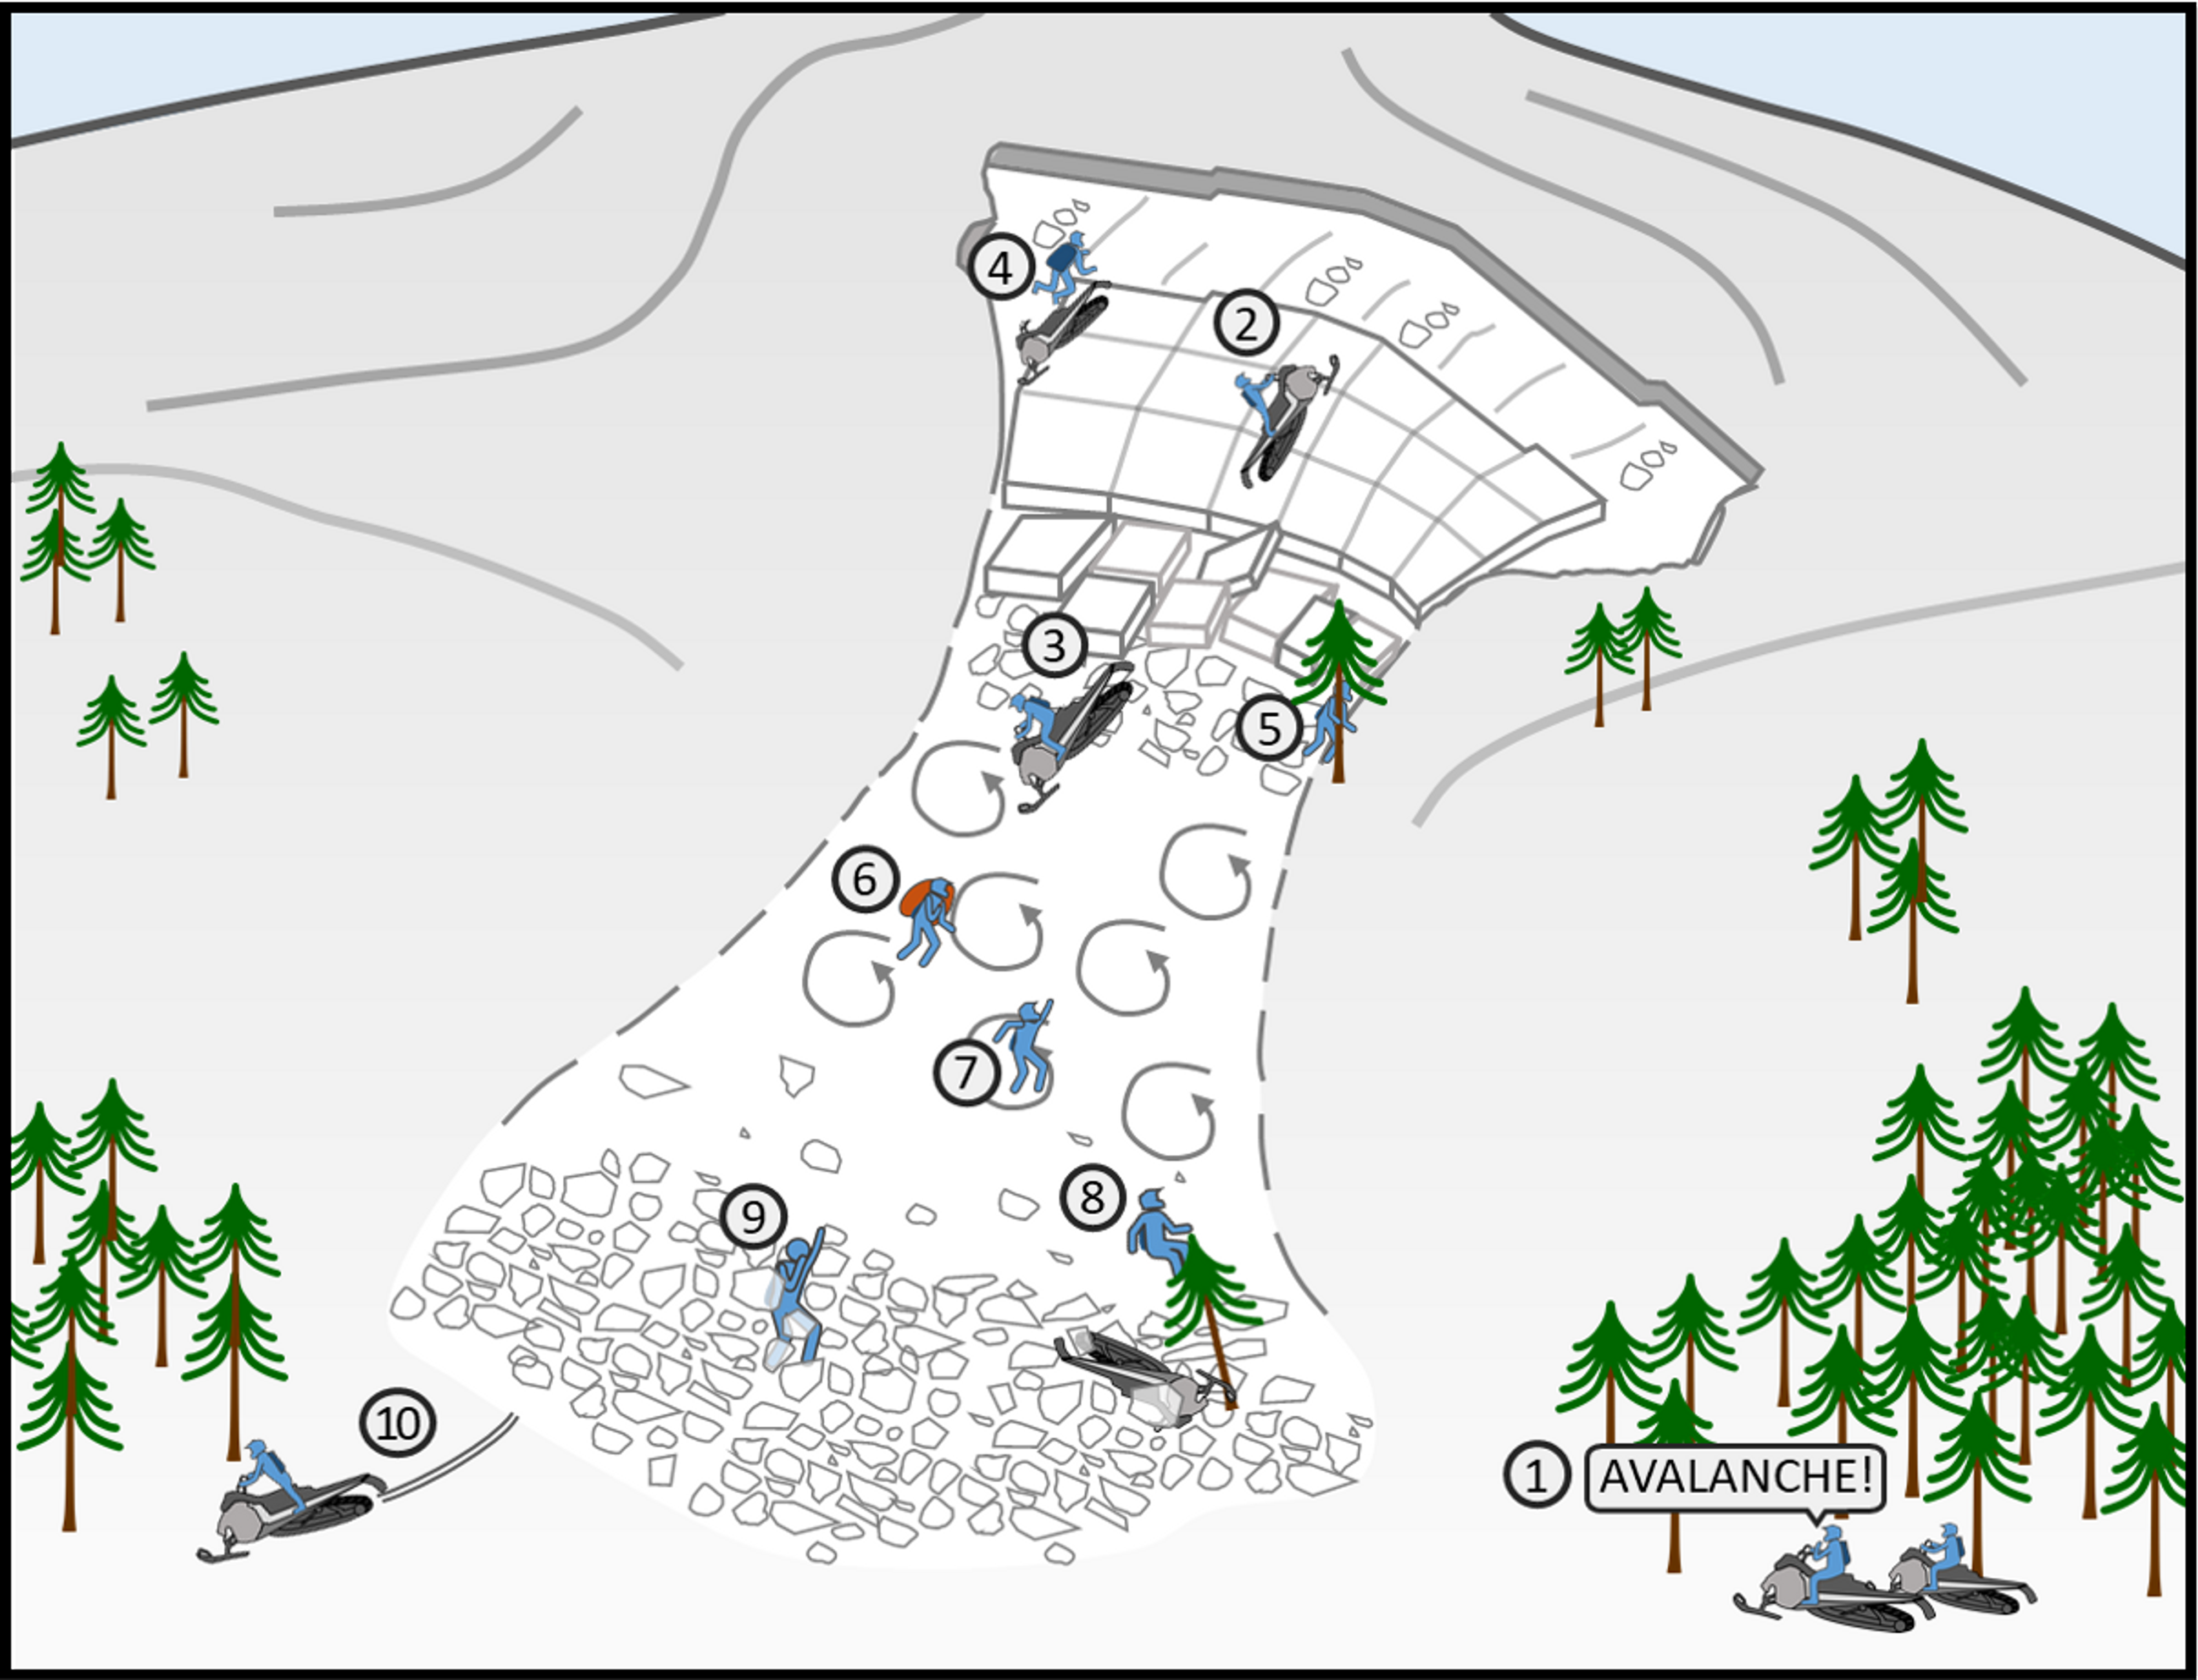 Diagram of avalanche survival techniques for snowmobilers